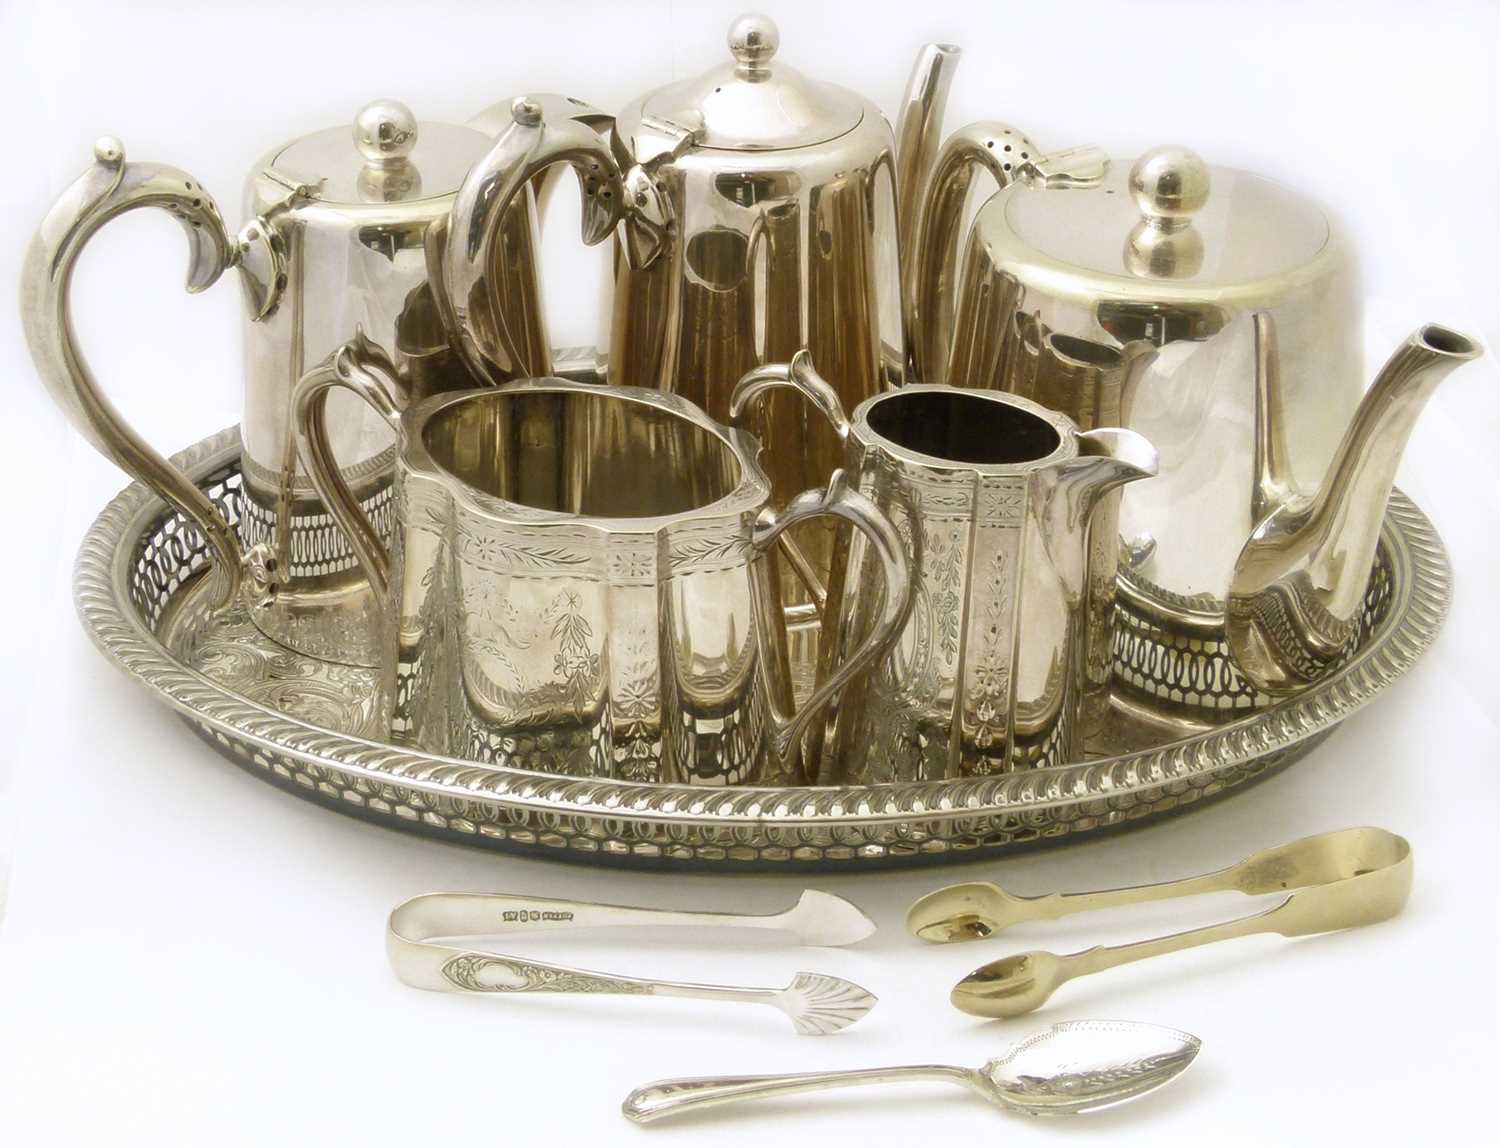 A collection of plated silverware